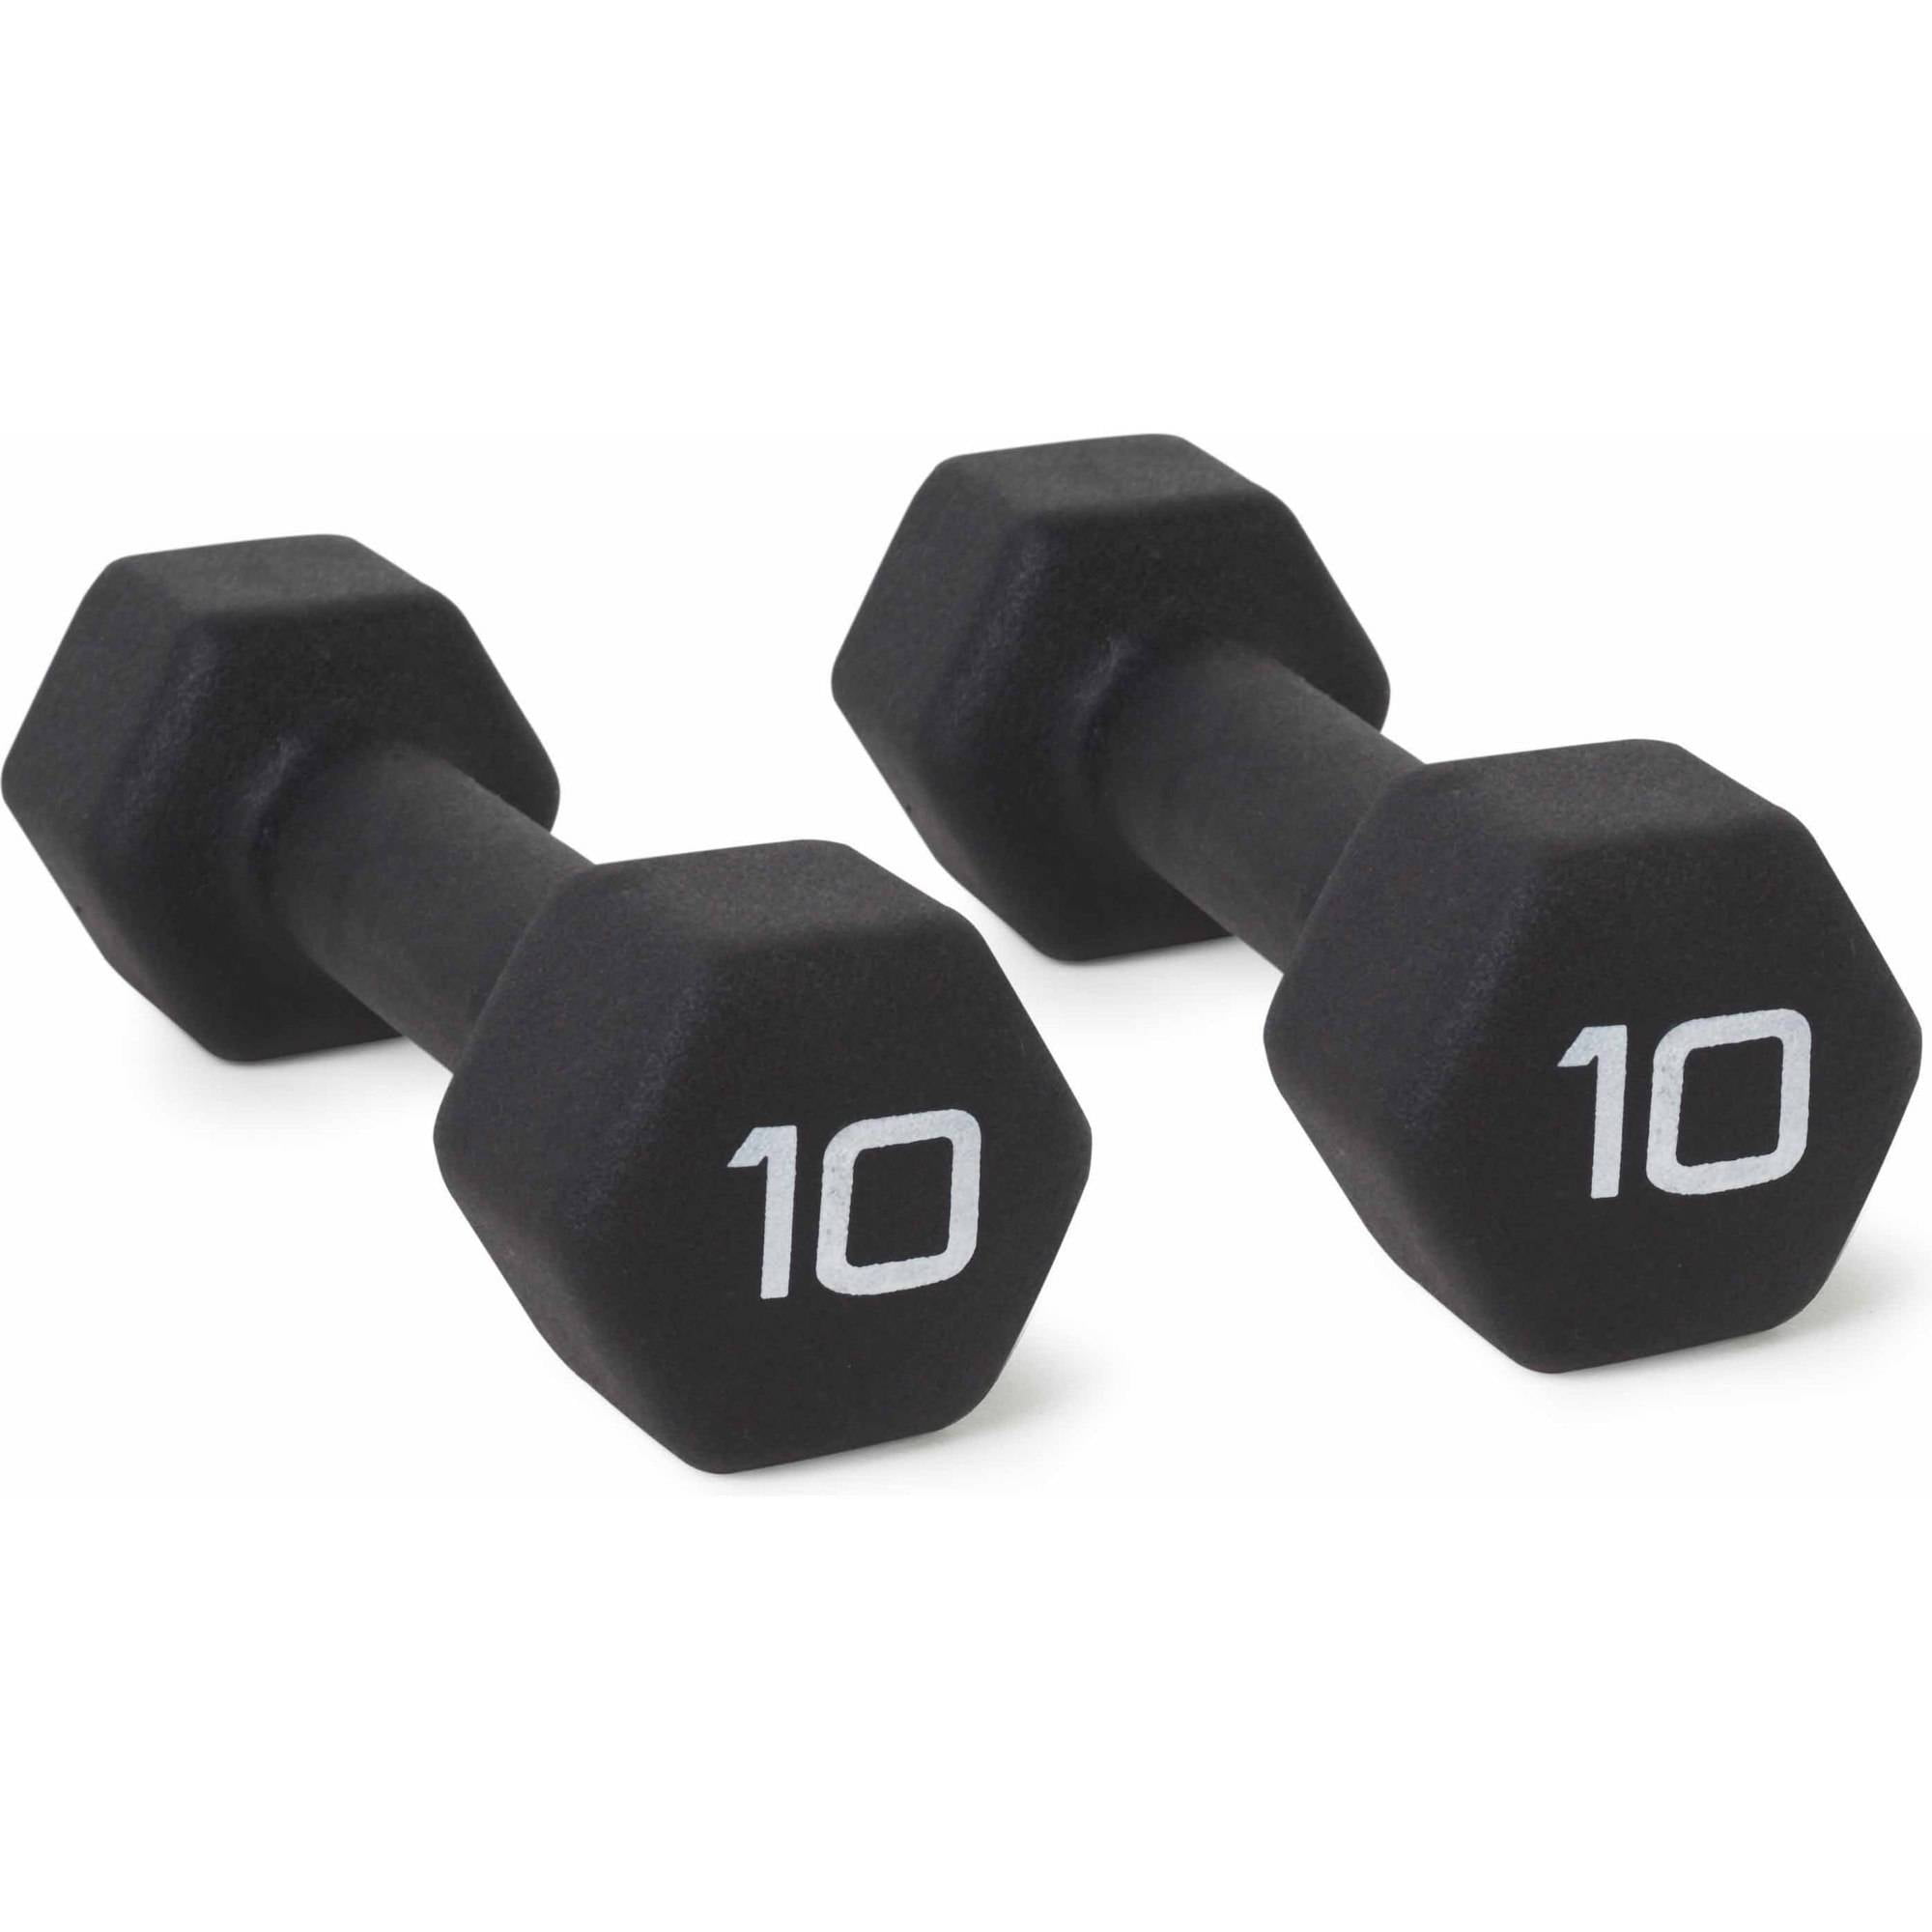 Fast Free Shipping!! CAP Hex Neoprene 5lb Pound Set of Two Dumbbell Weights New 